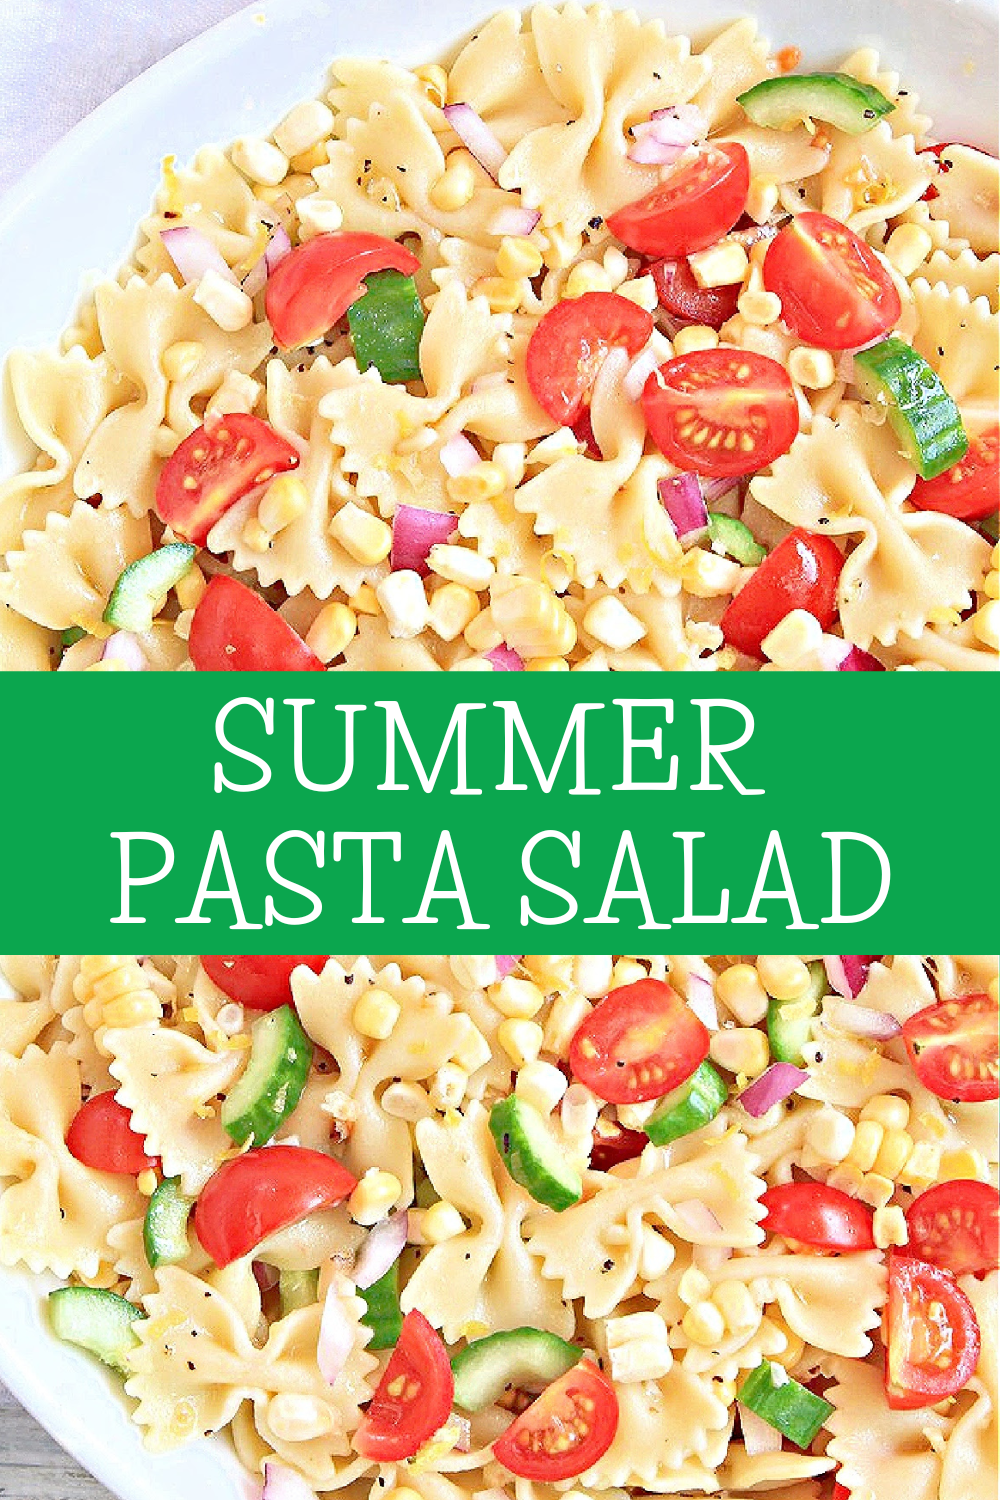 Summer Pasta Salad ~ Fresh from the garden vegetables tossed with farfalle pasta and tangy homemade lemon dressing. Perfect for all your summertime potlucks and cookouts!  via @thiswifecooks